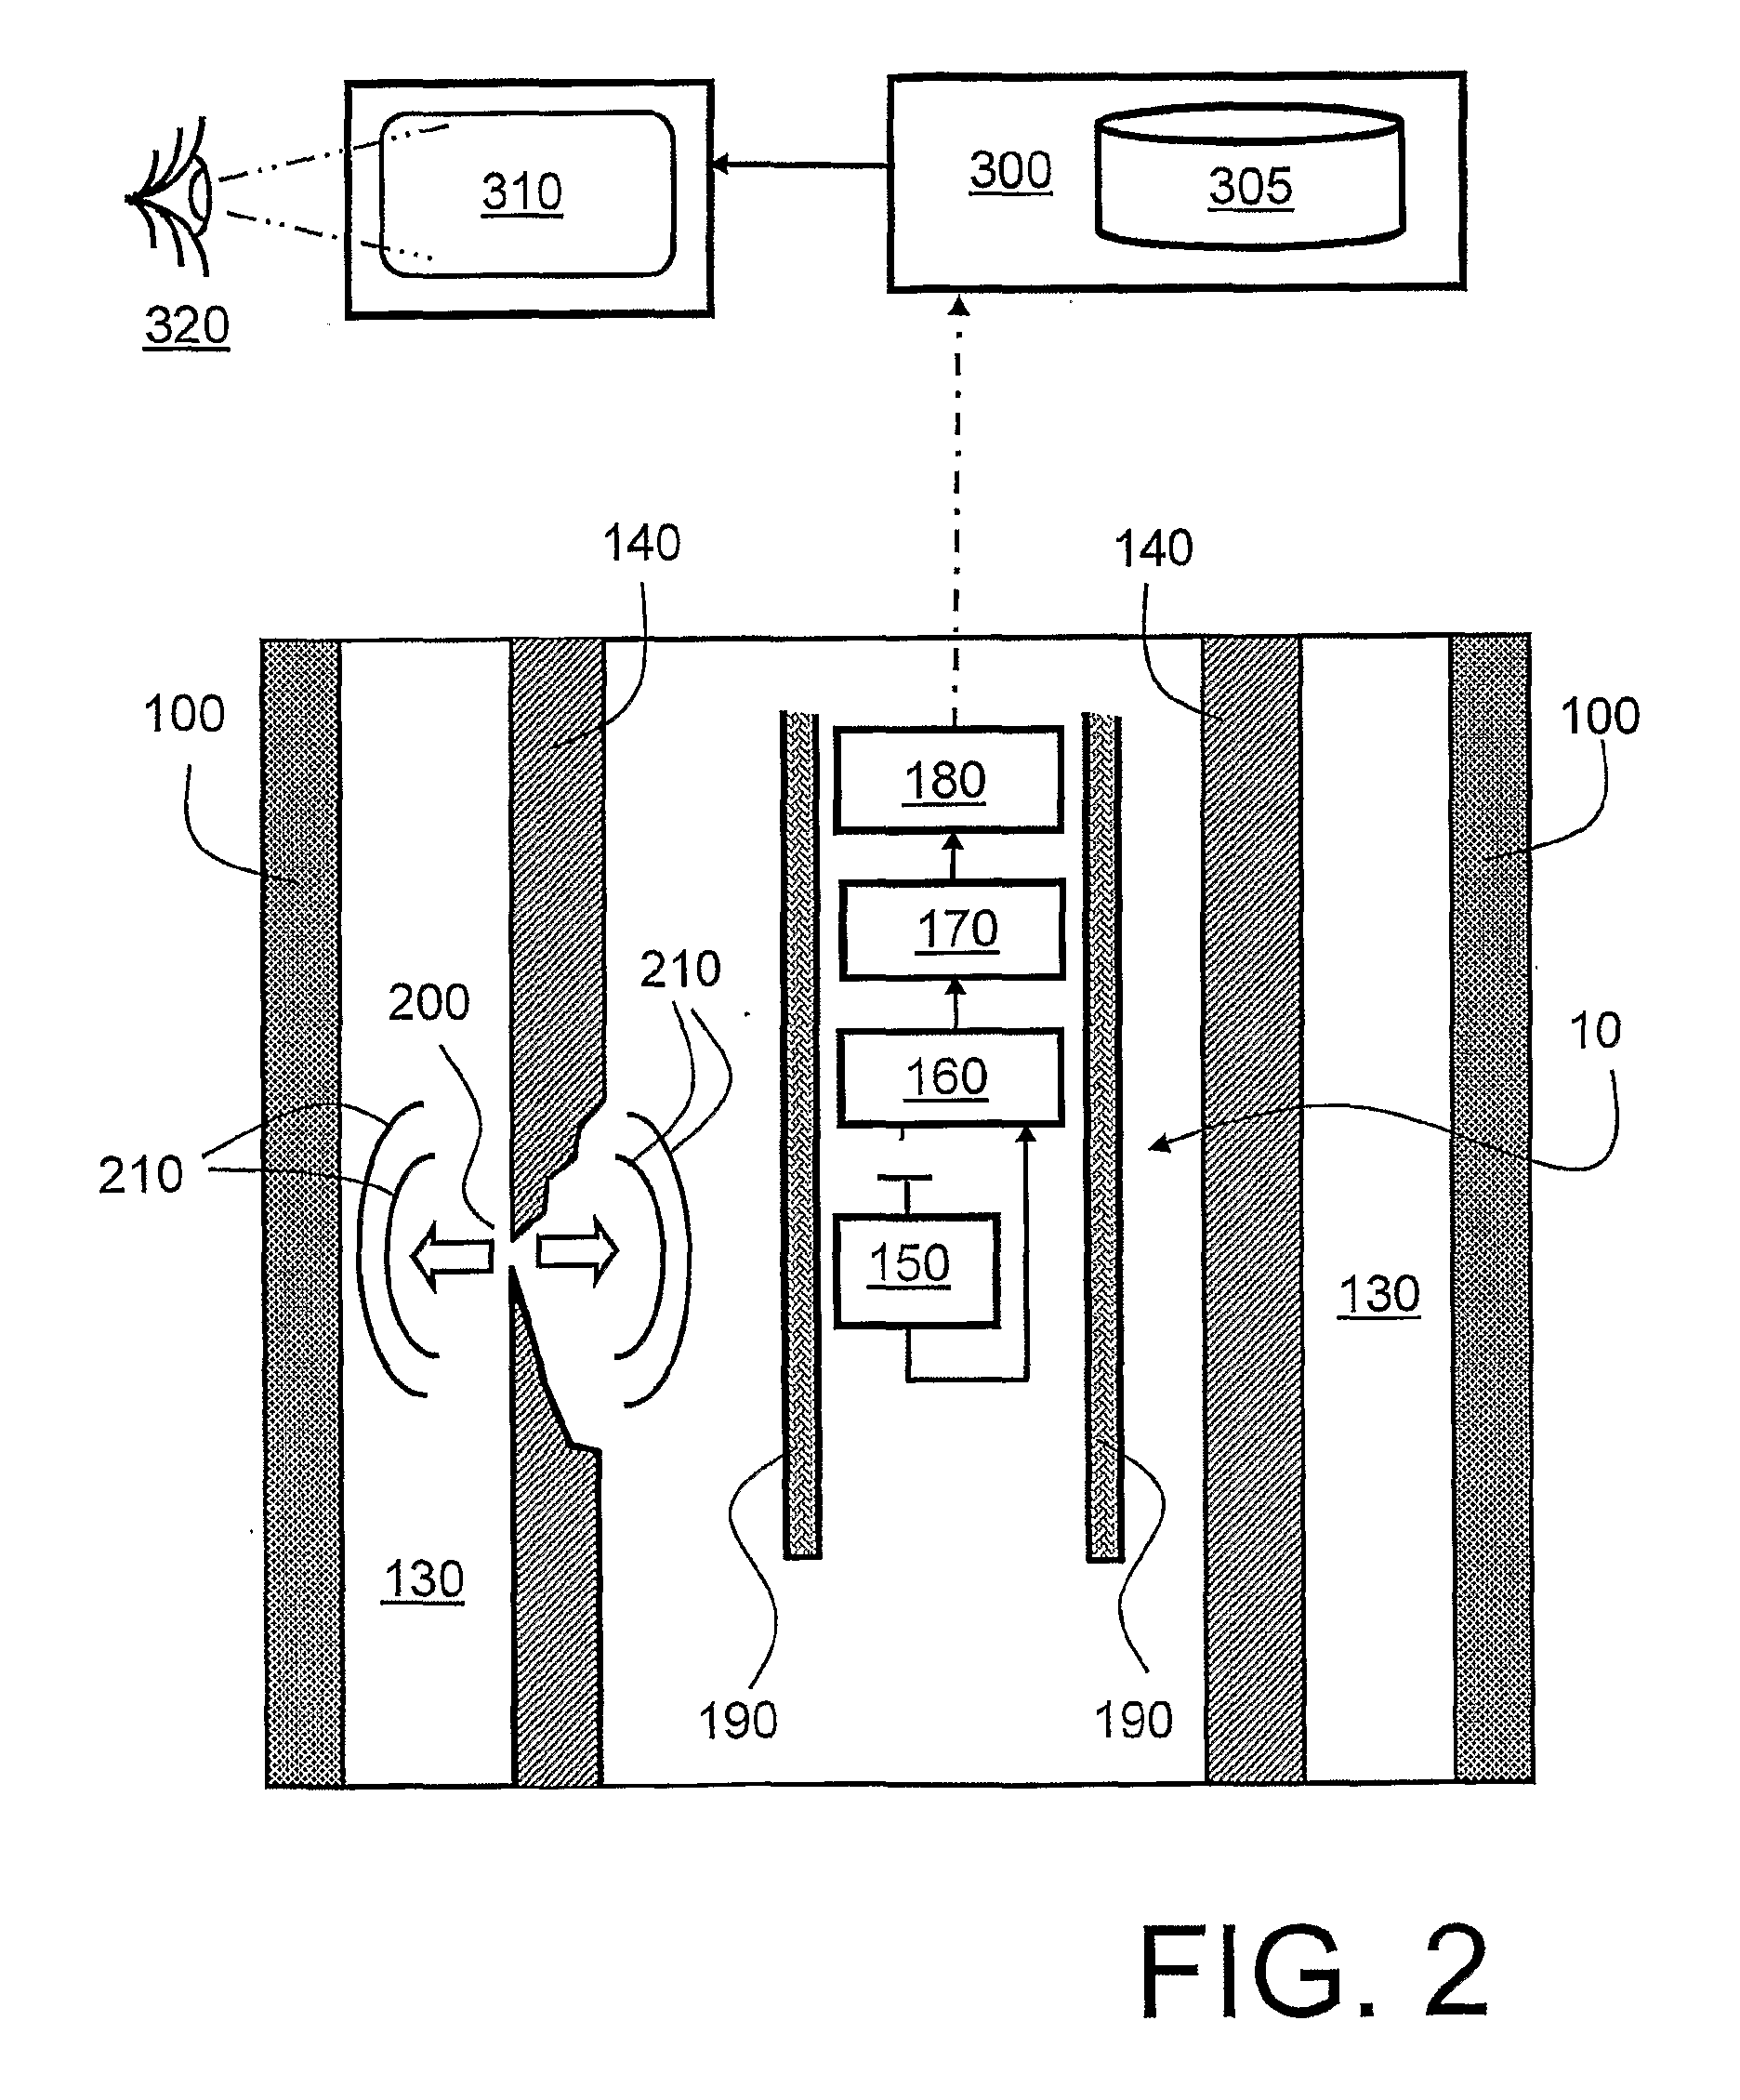 Method and system for registering and measuring leaks and flows